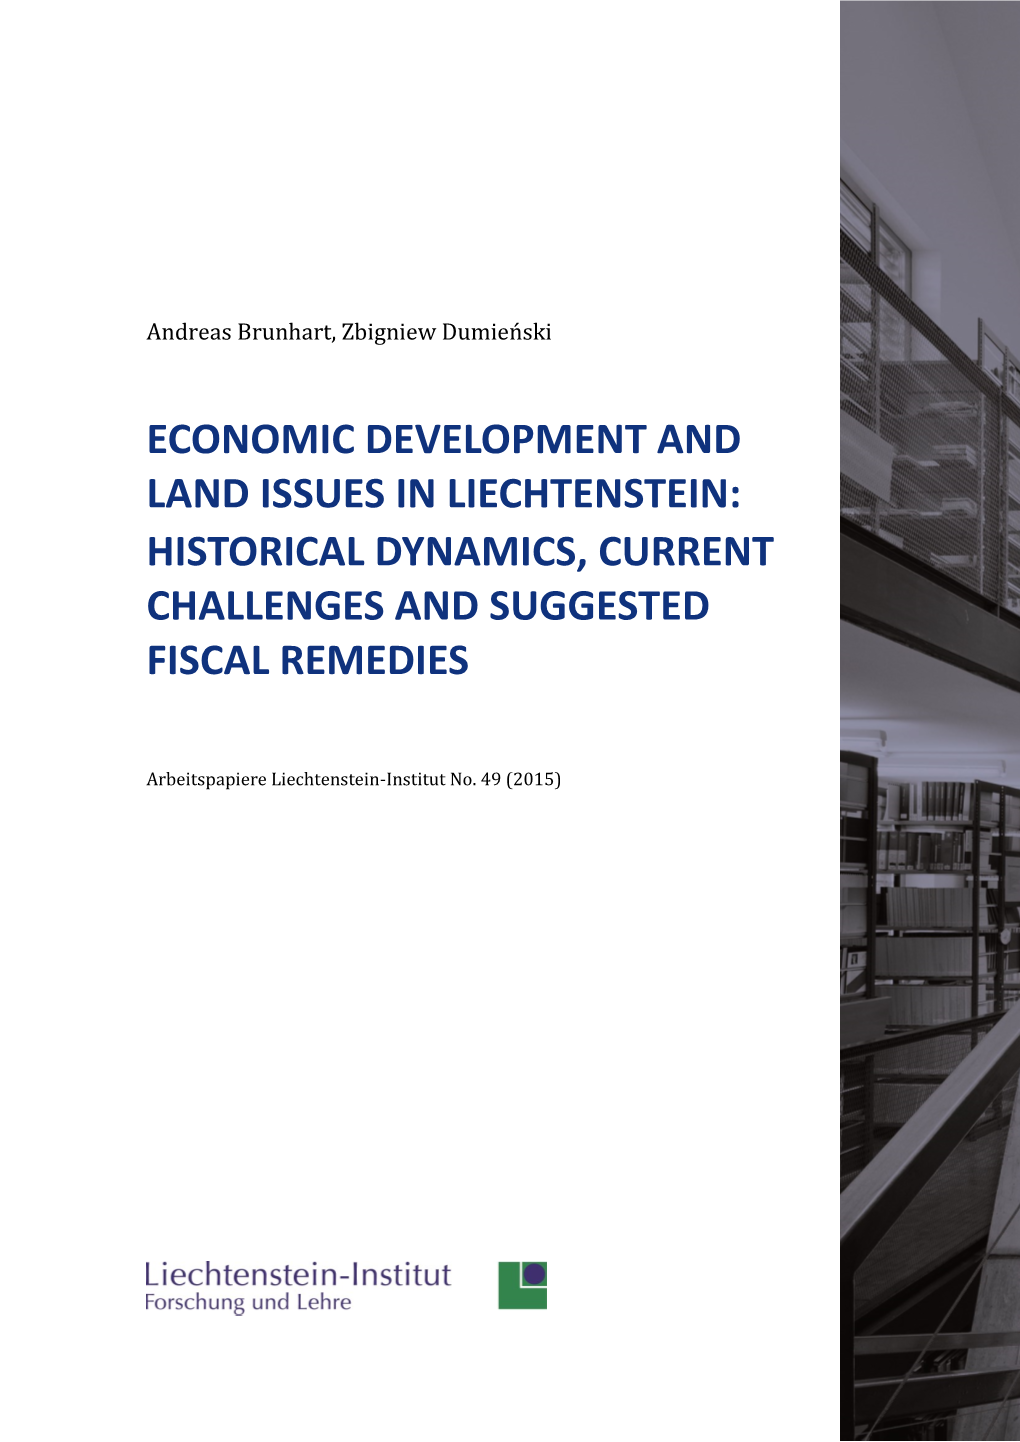 Economic Development and Land Issues in Liechtenstein: Historical Dynamics, Current Challenges and Suggested Fiscal Remedies